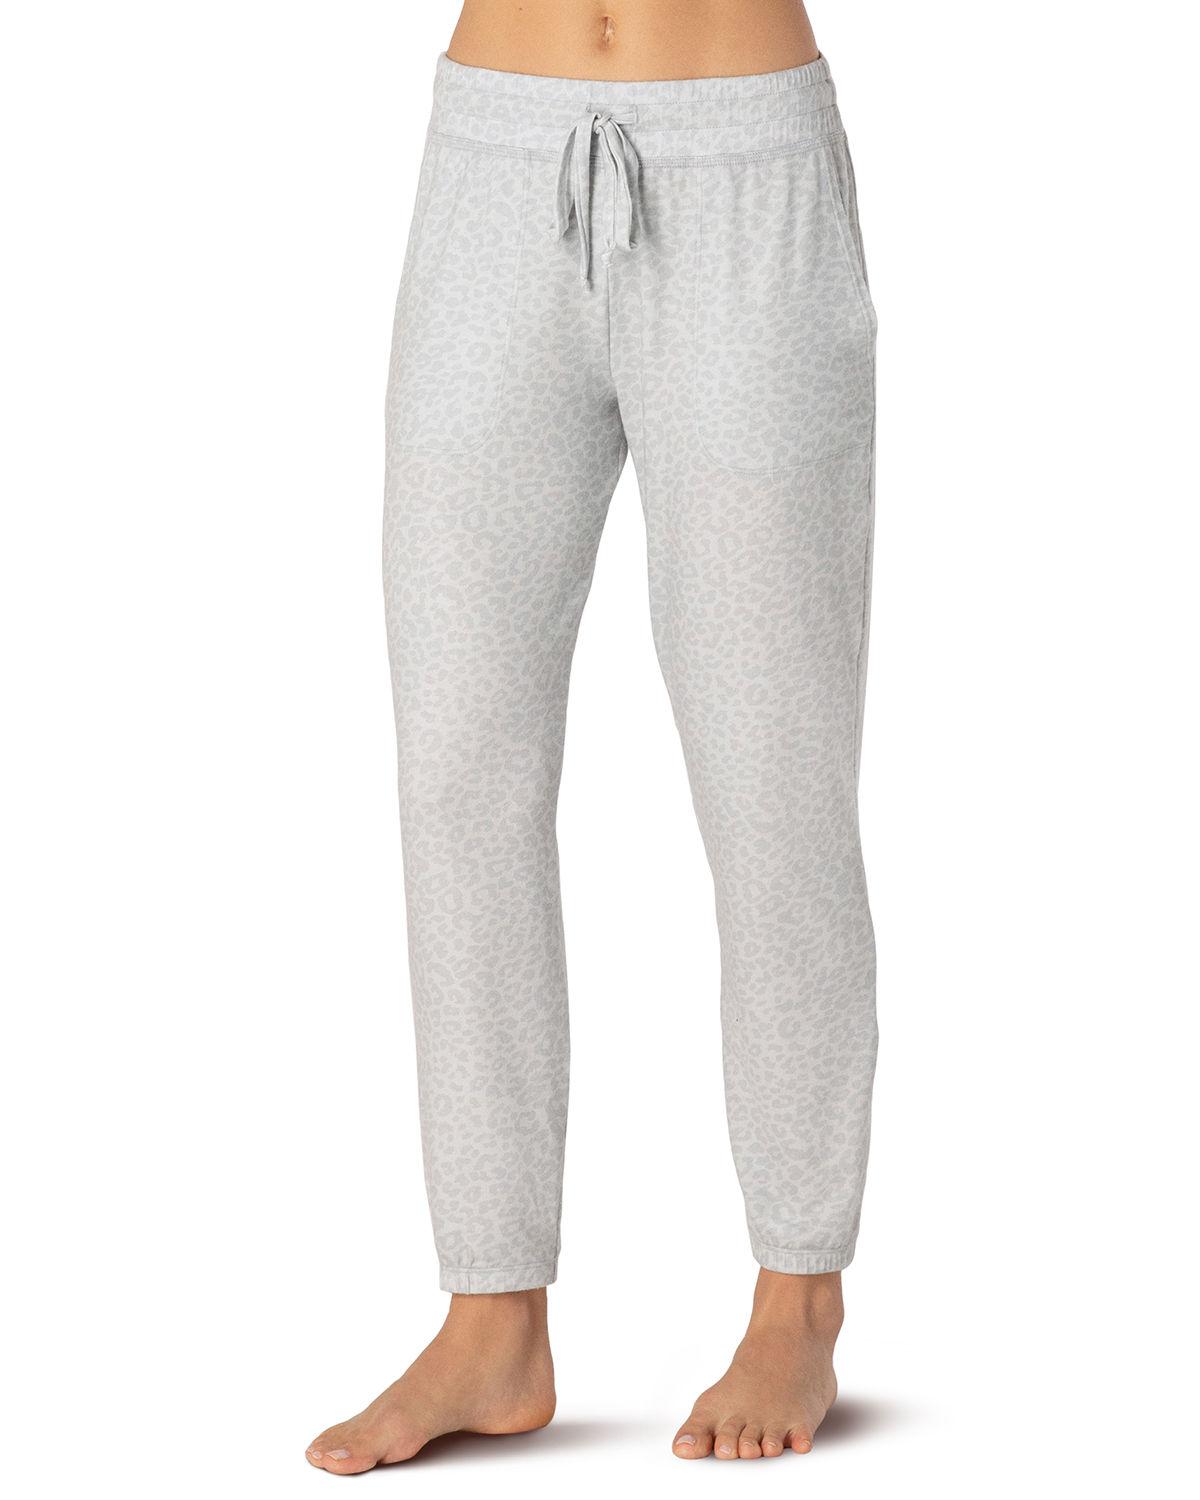 Beyond Yoga Synthetic Living Easy Printed Sweatpants in Gray Leopard ...